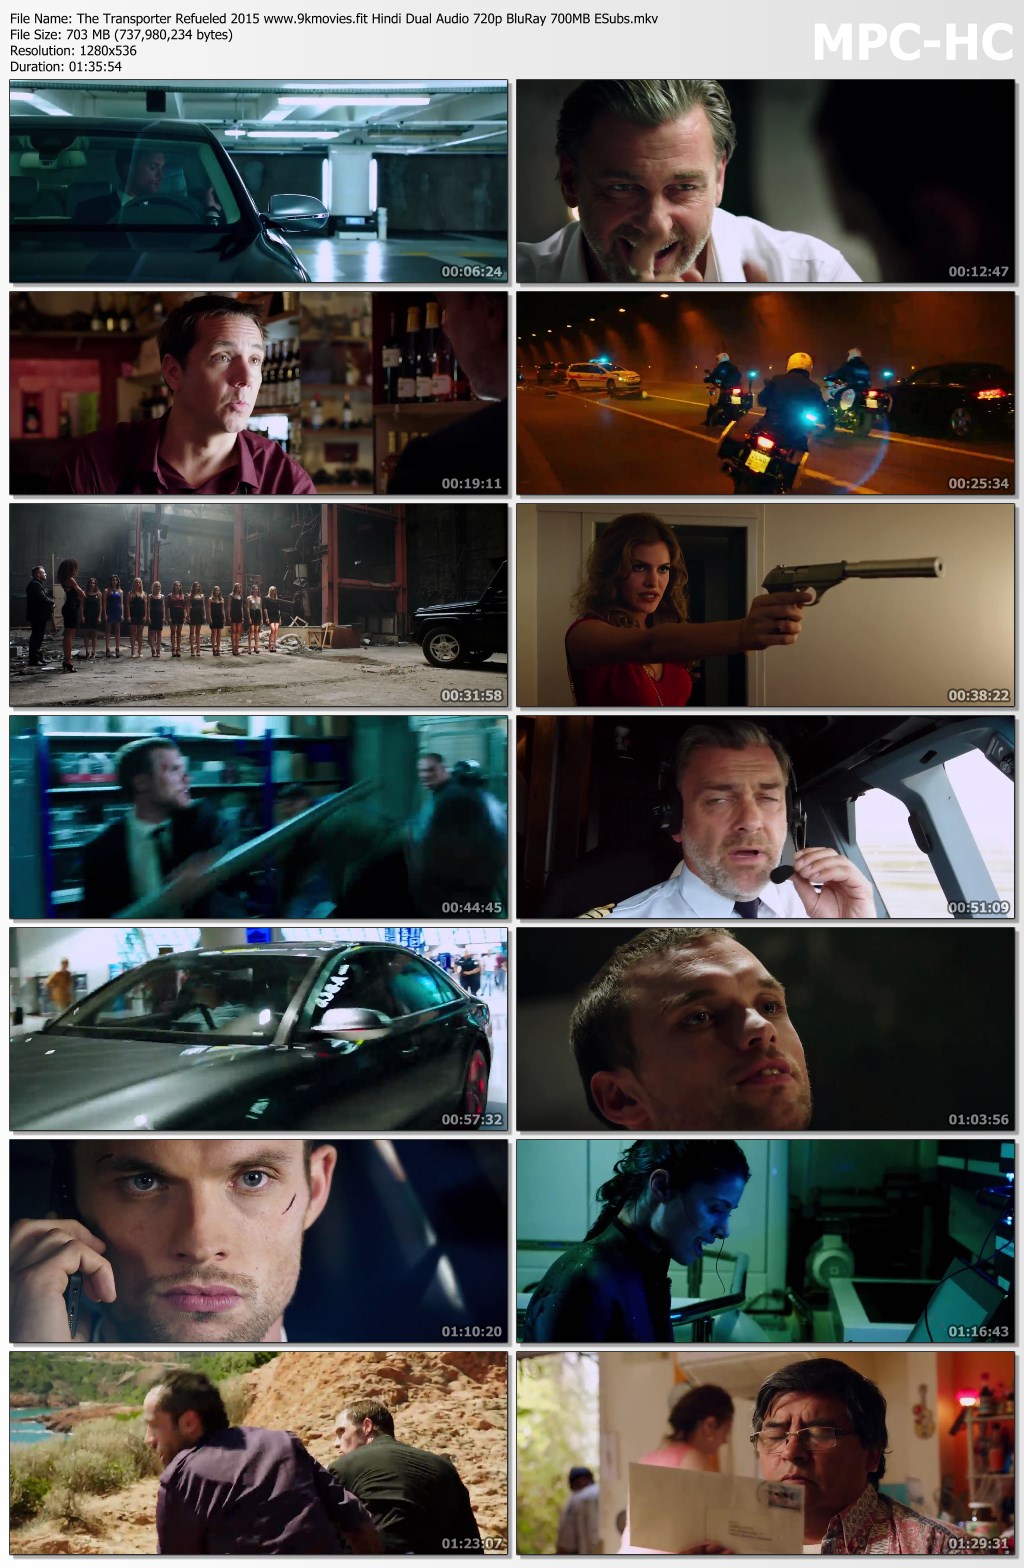 The Transporter: Refueled (English) In Hindi 720p Downloadl